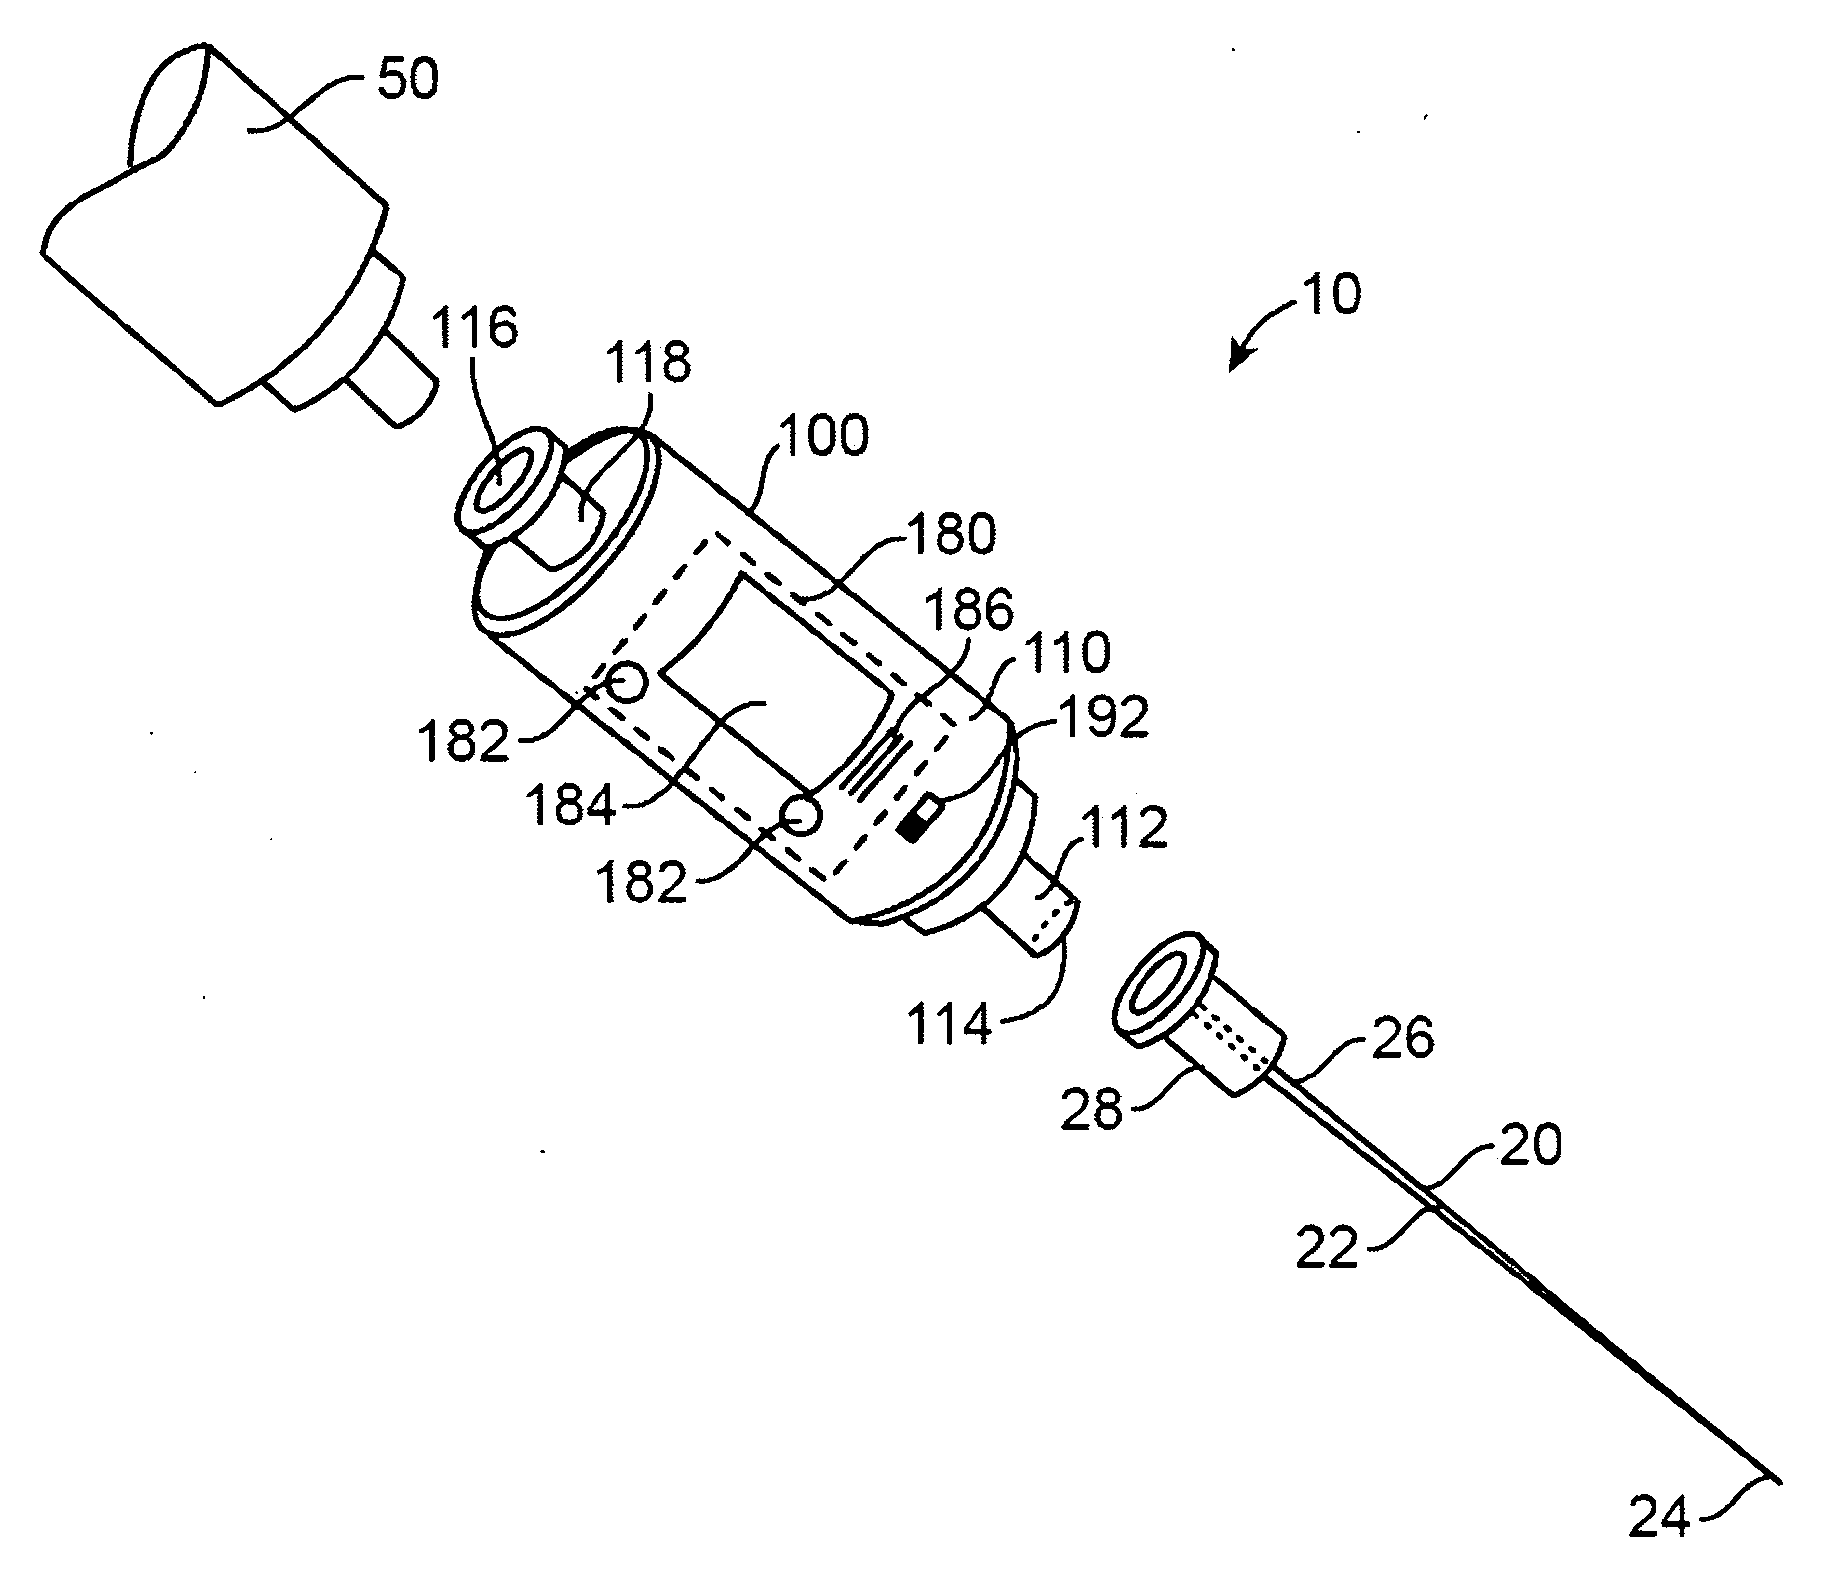 Systems, methods, and devices for facilitating access to target anatomical sites or environments